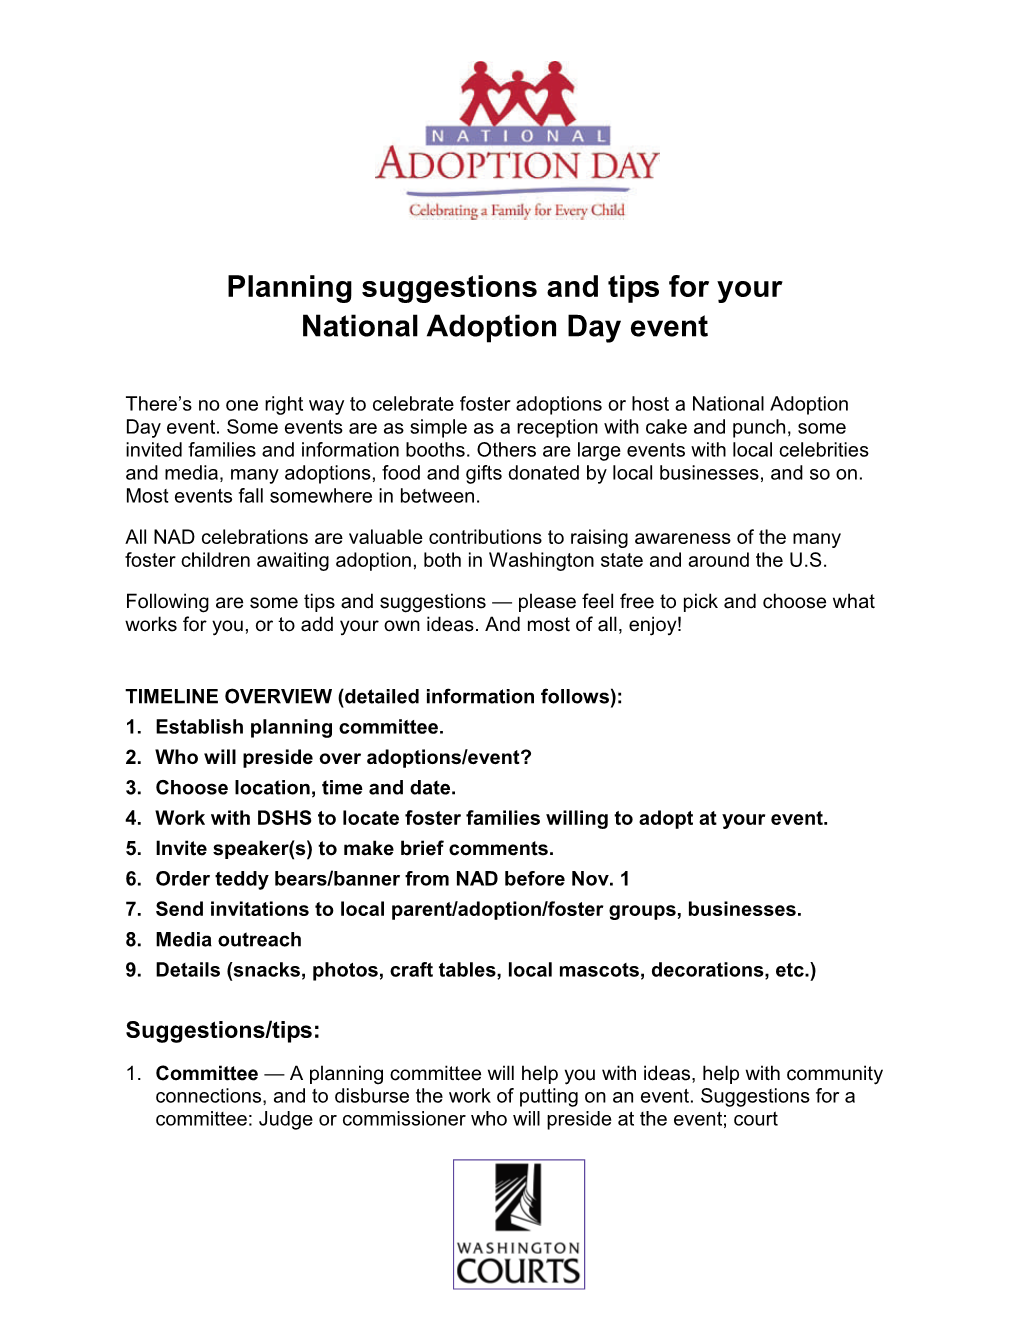 Planning Suggestions and Tips for Your National Adoption Day Event